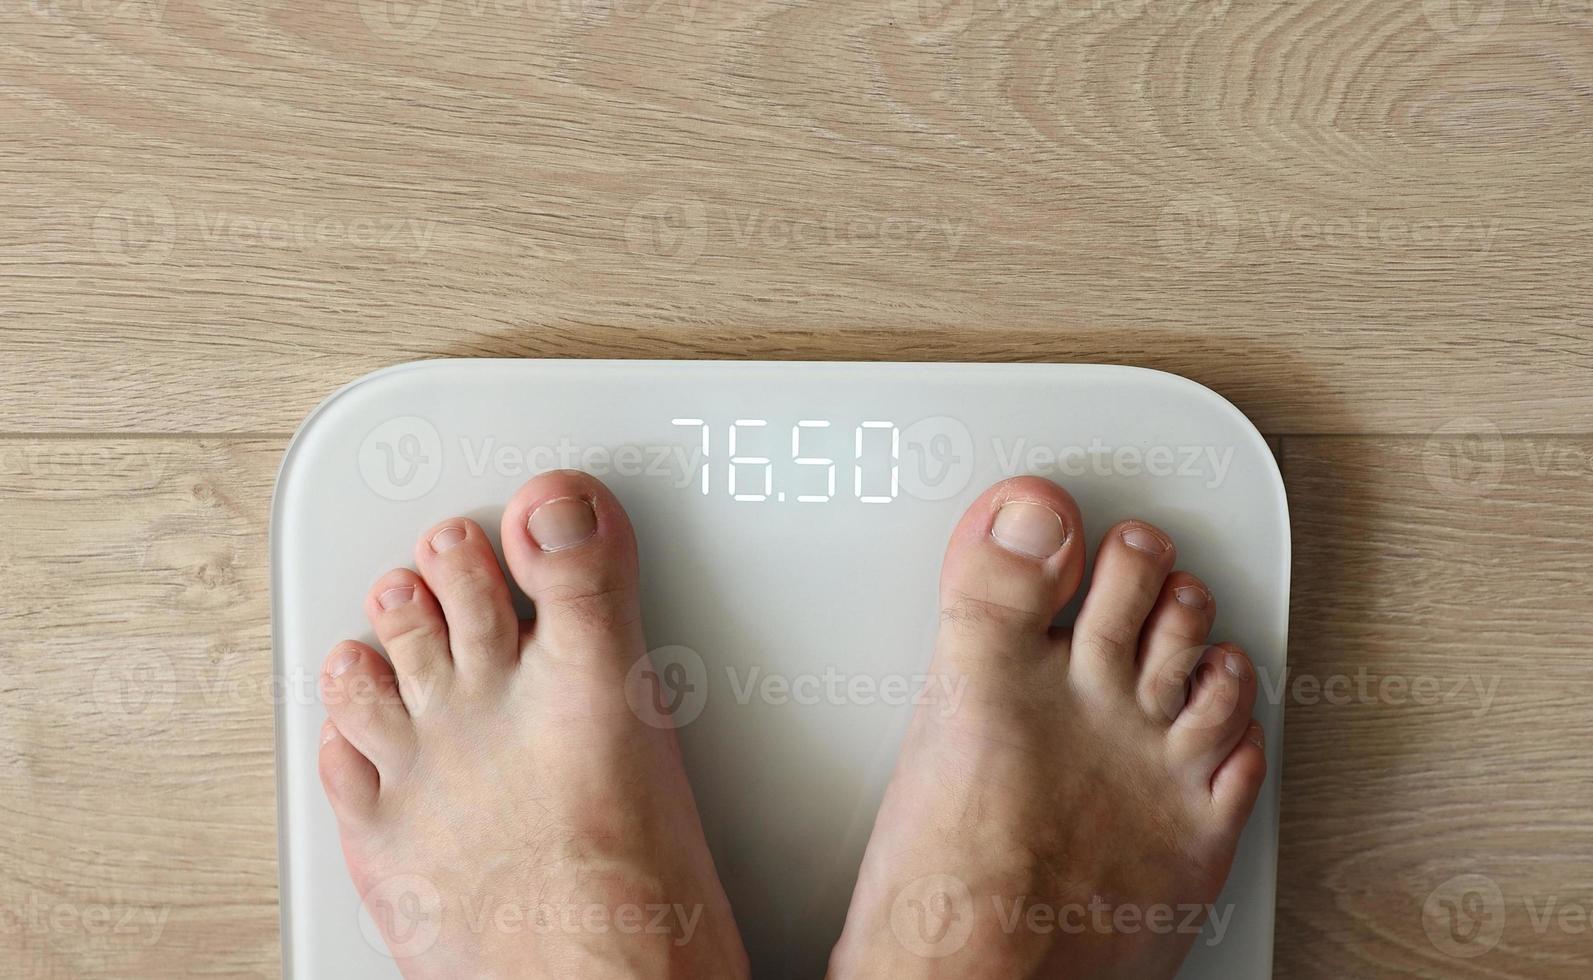 Man weighing himself  male bare feet stepping on white digital floor scales at home close up view. Measuring weight, control, wellness and diet concept photo